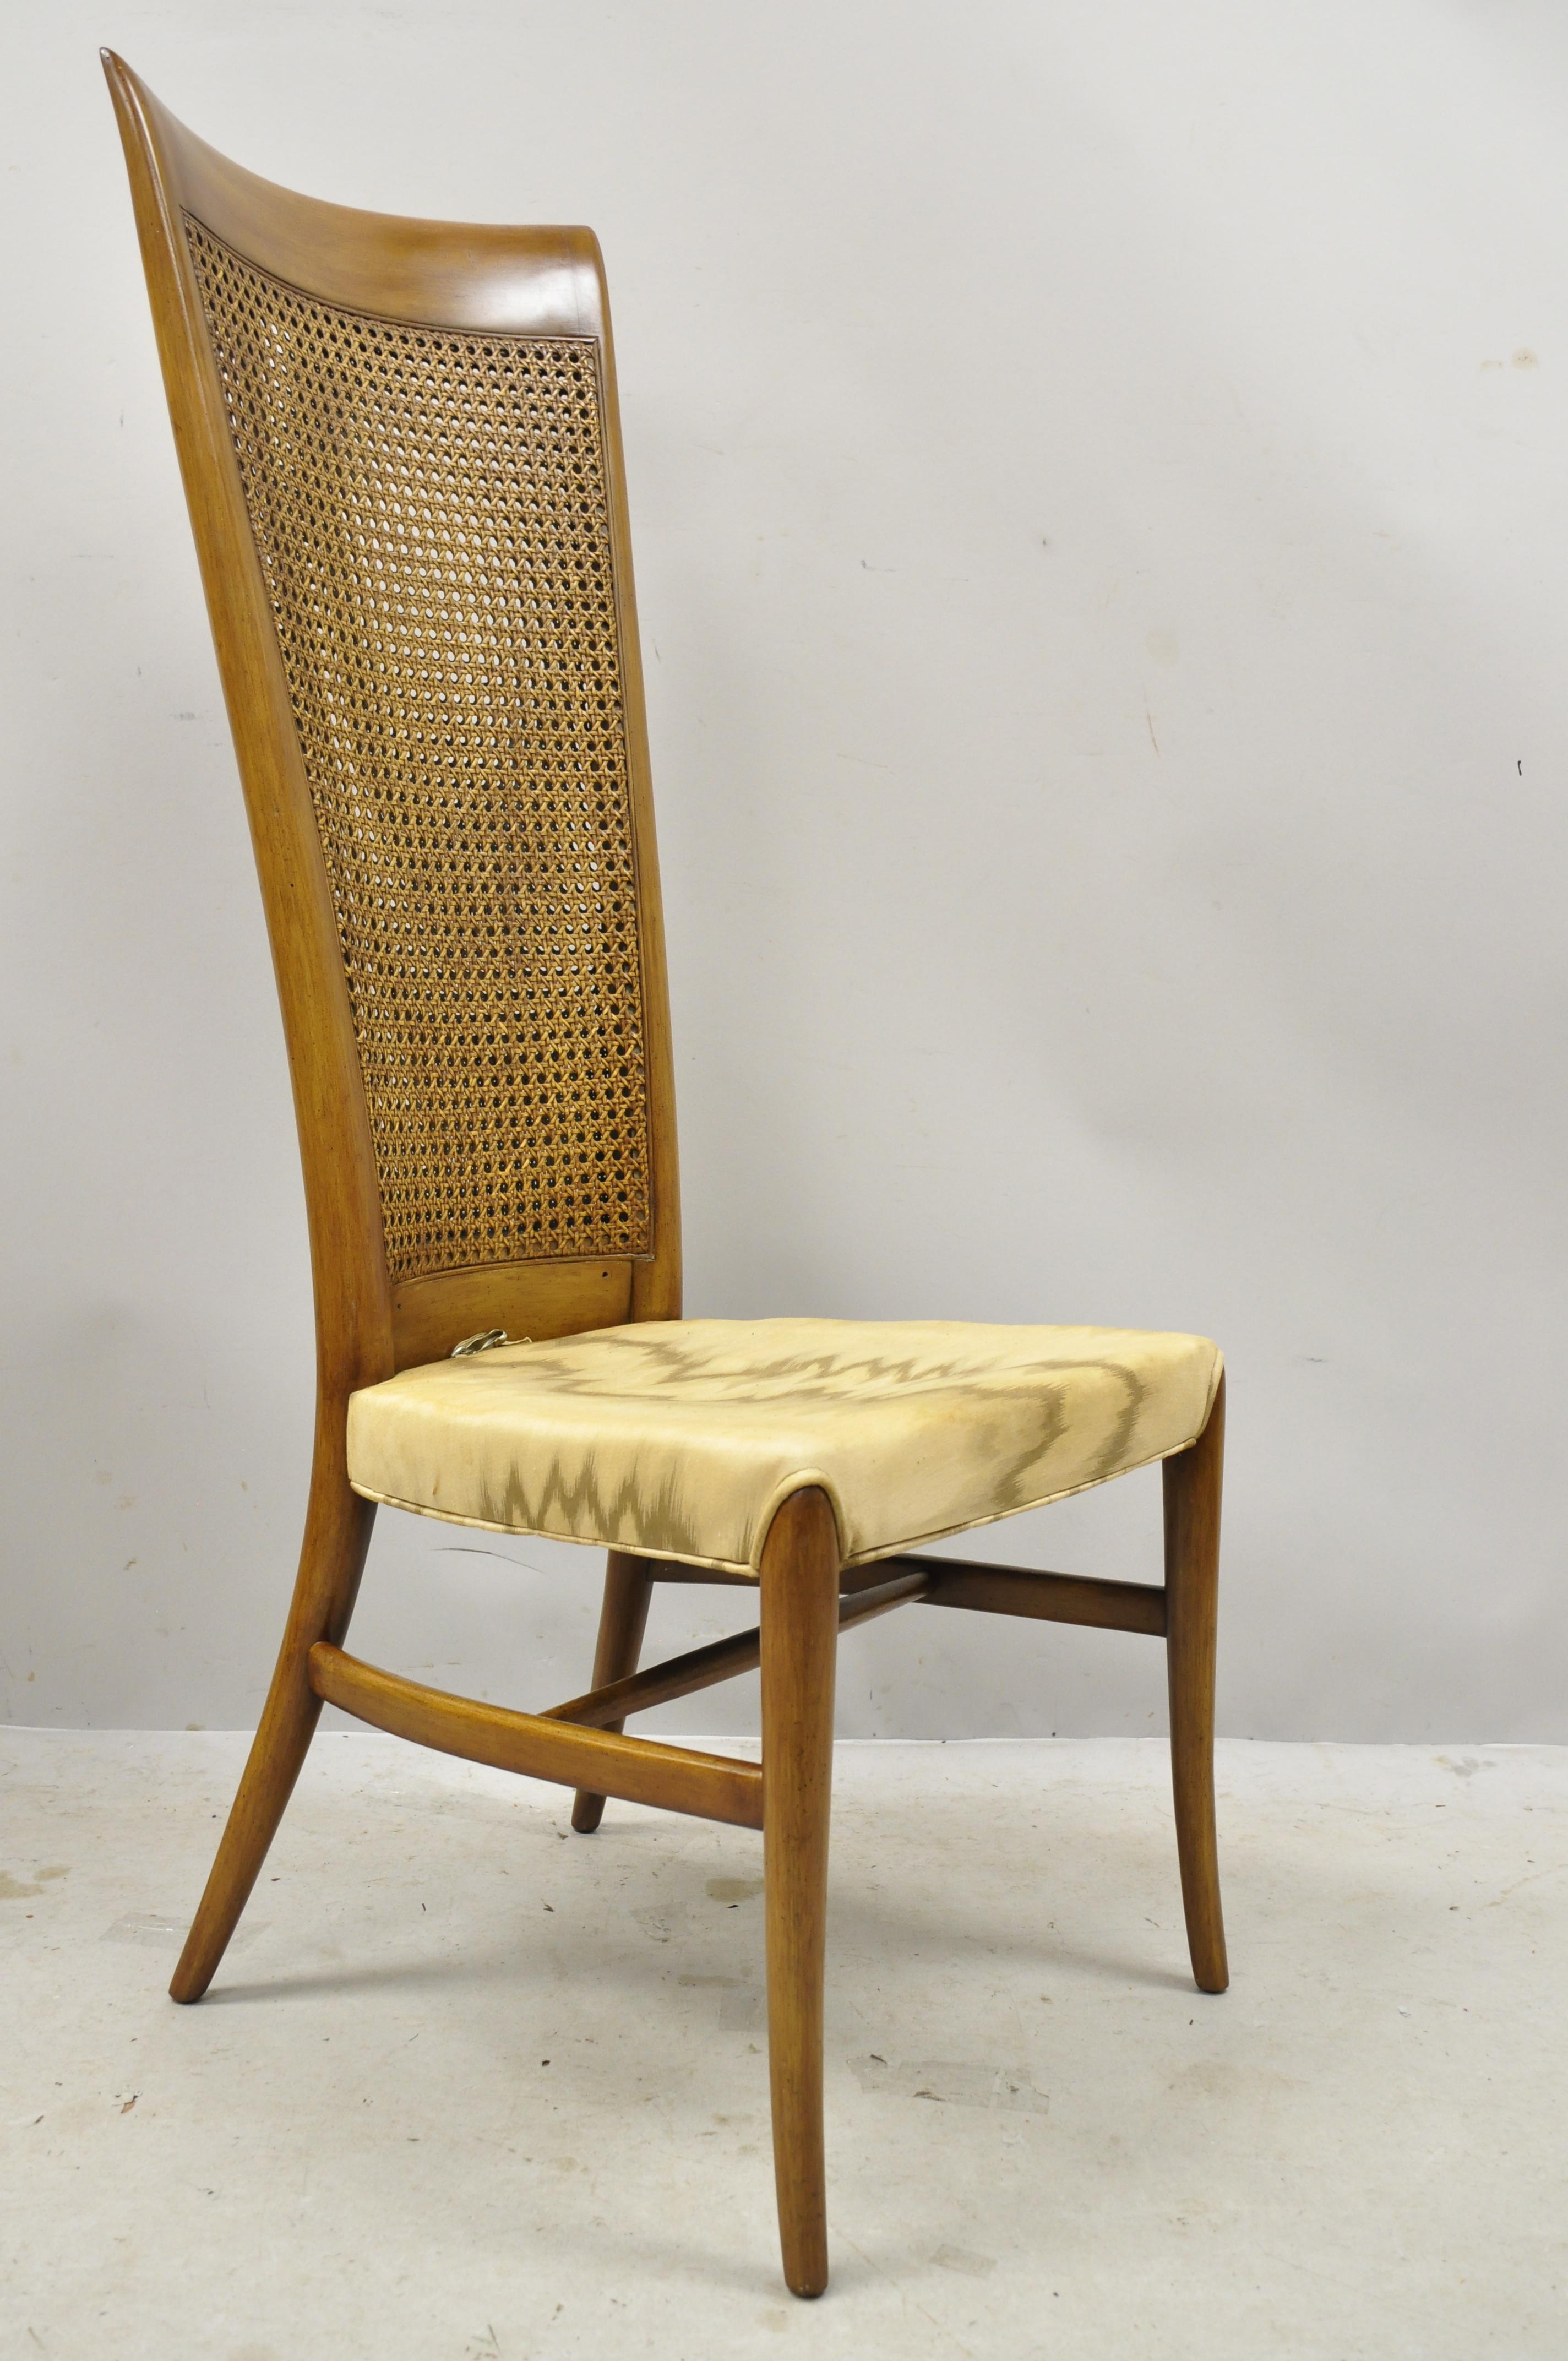 Vintage Mid-Century Modern tall cane back Italian Gibbings Klismos style dining chairs, set of 4. Set includes tall double cane backs, angled and tapered legs, stretcher base, solid wood frame, beautiful wood grain, very nice vintage set, quality